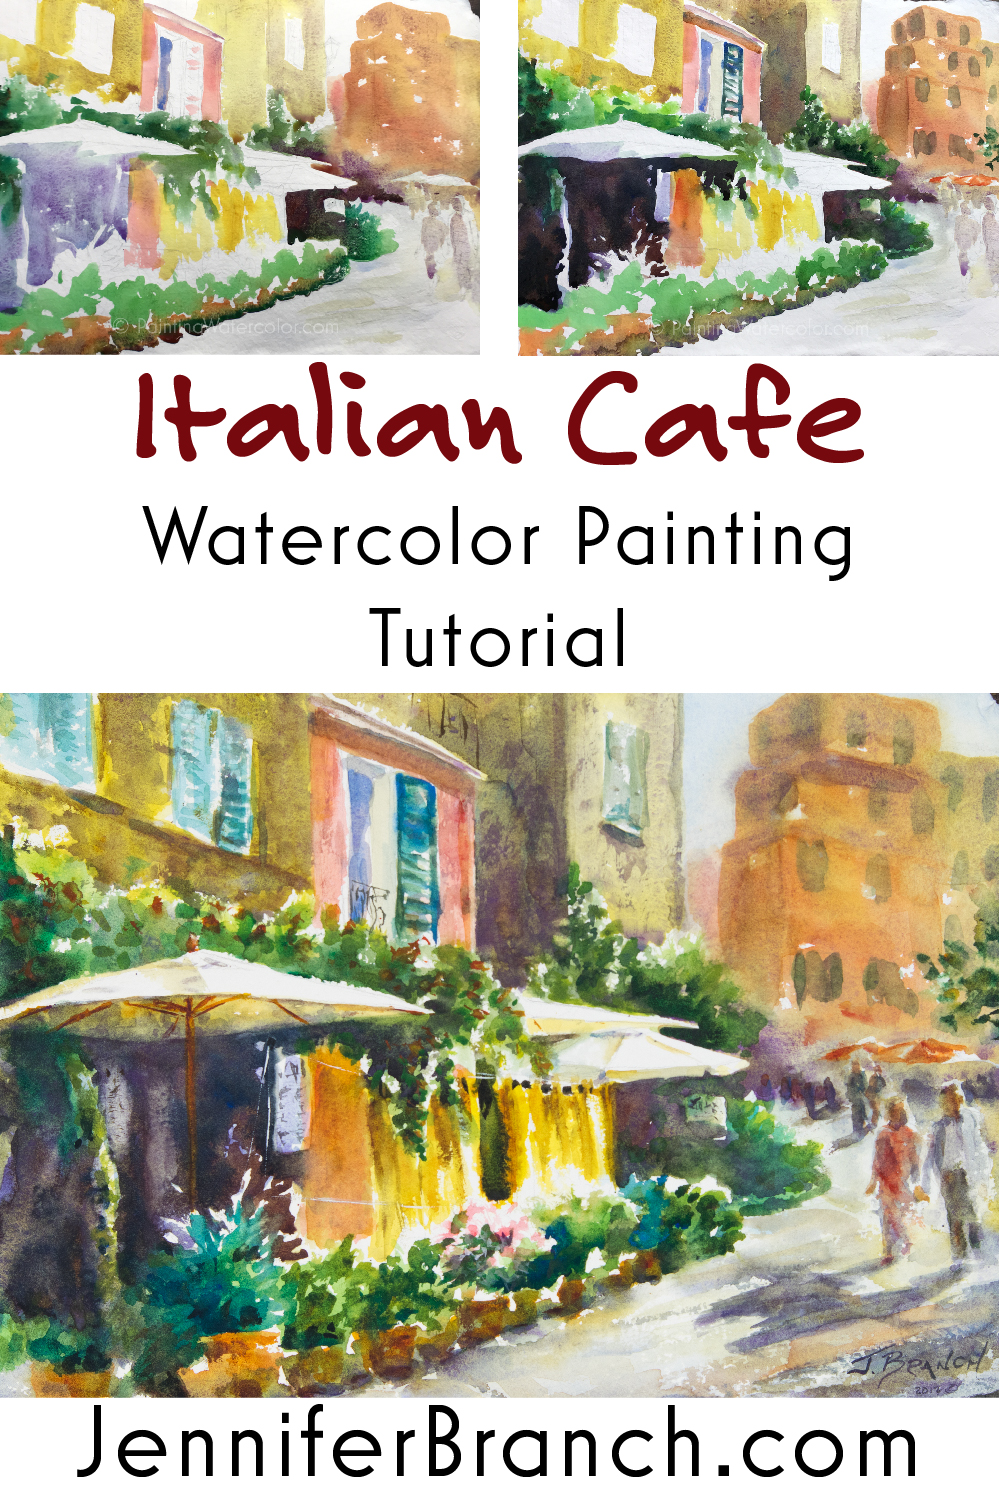 Italian Cafe Painting Tutorial watercolor painting tutorial by Jennifer Branch